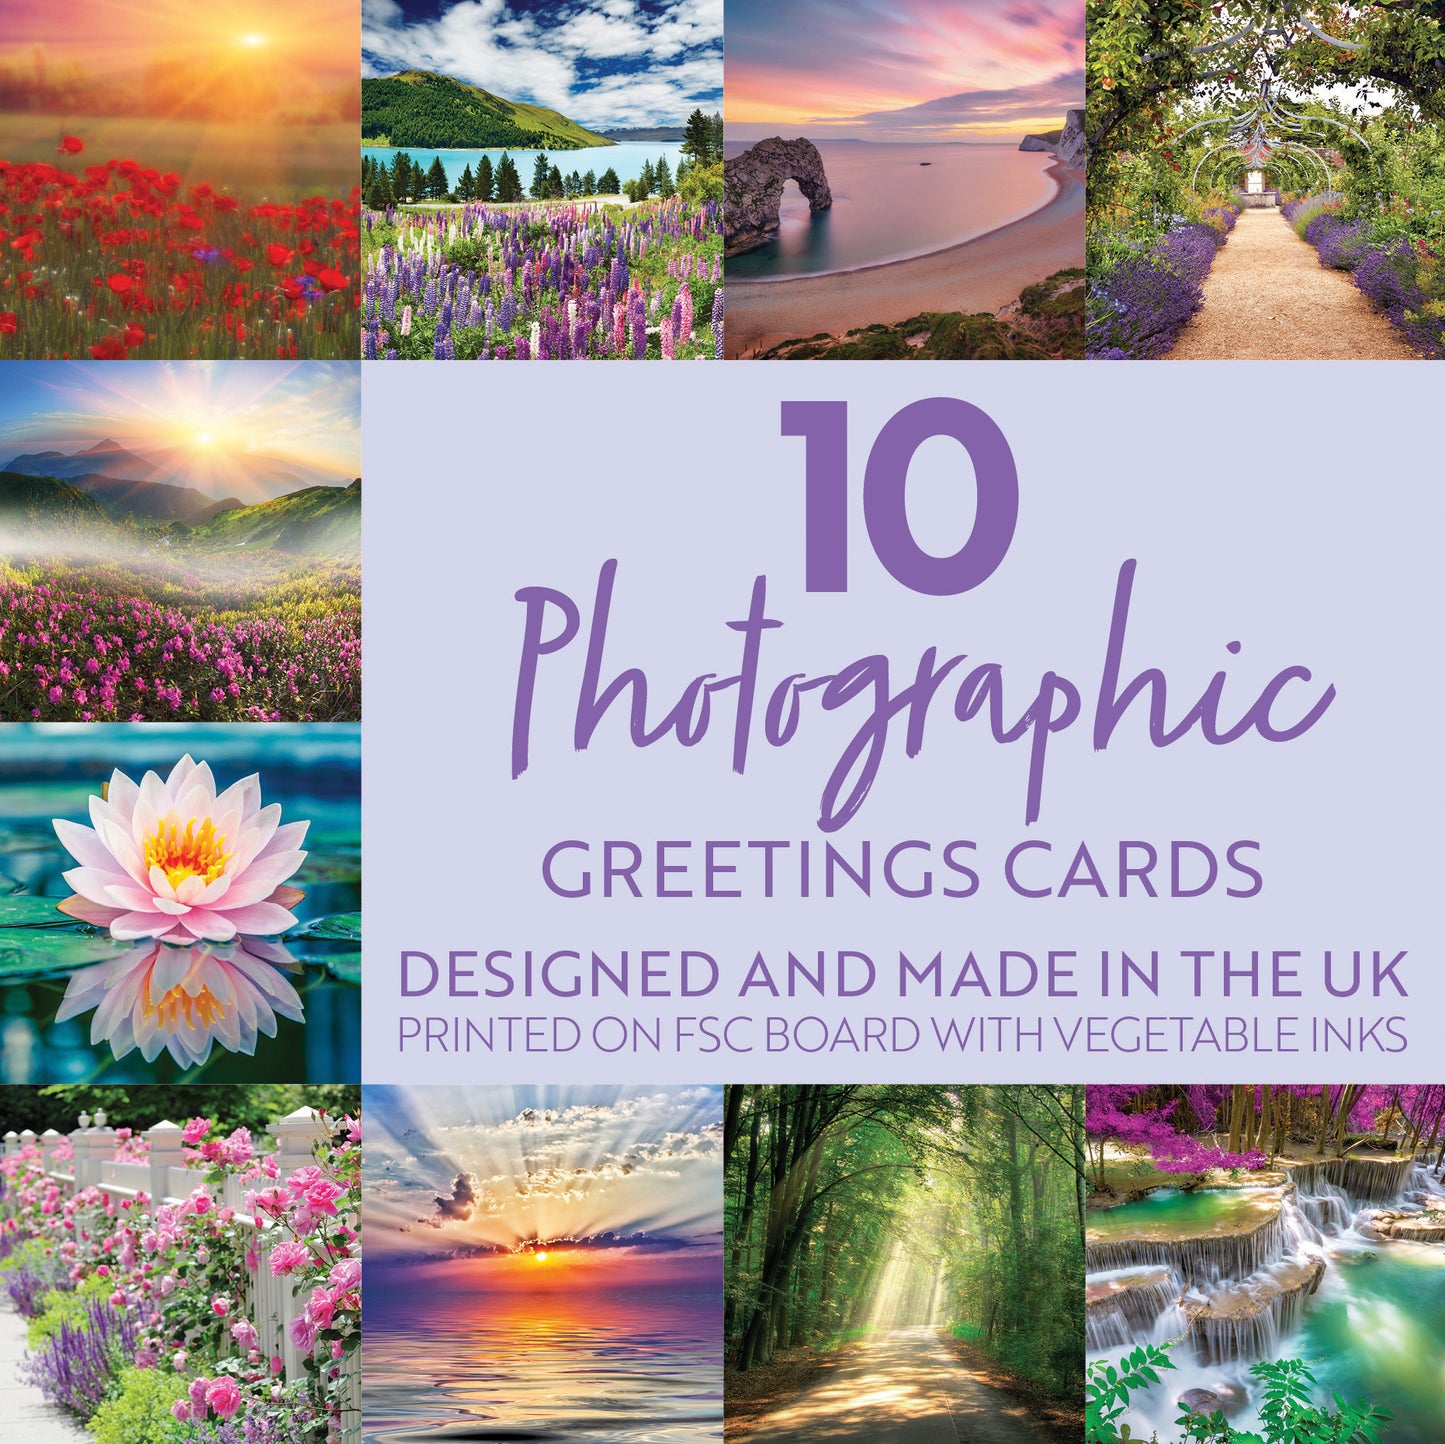 10 Photographic Greetings Cards